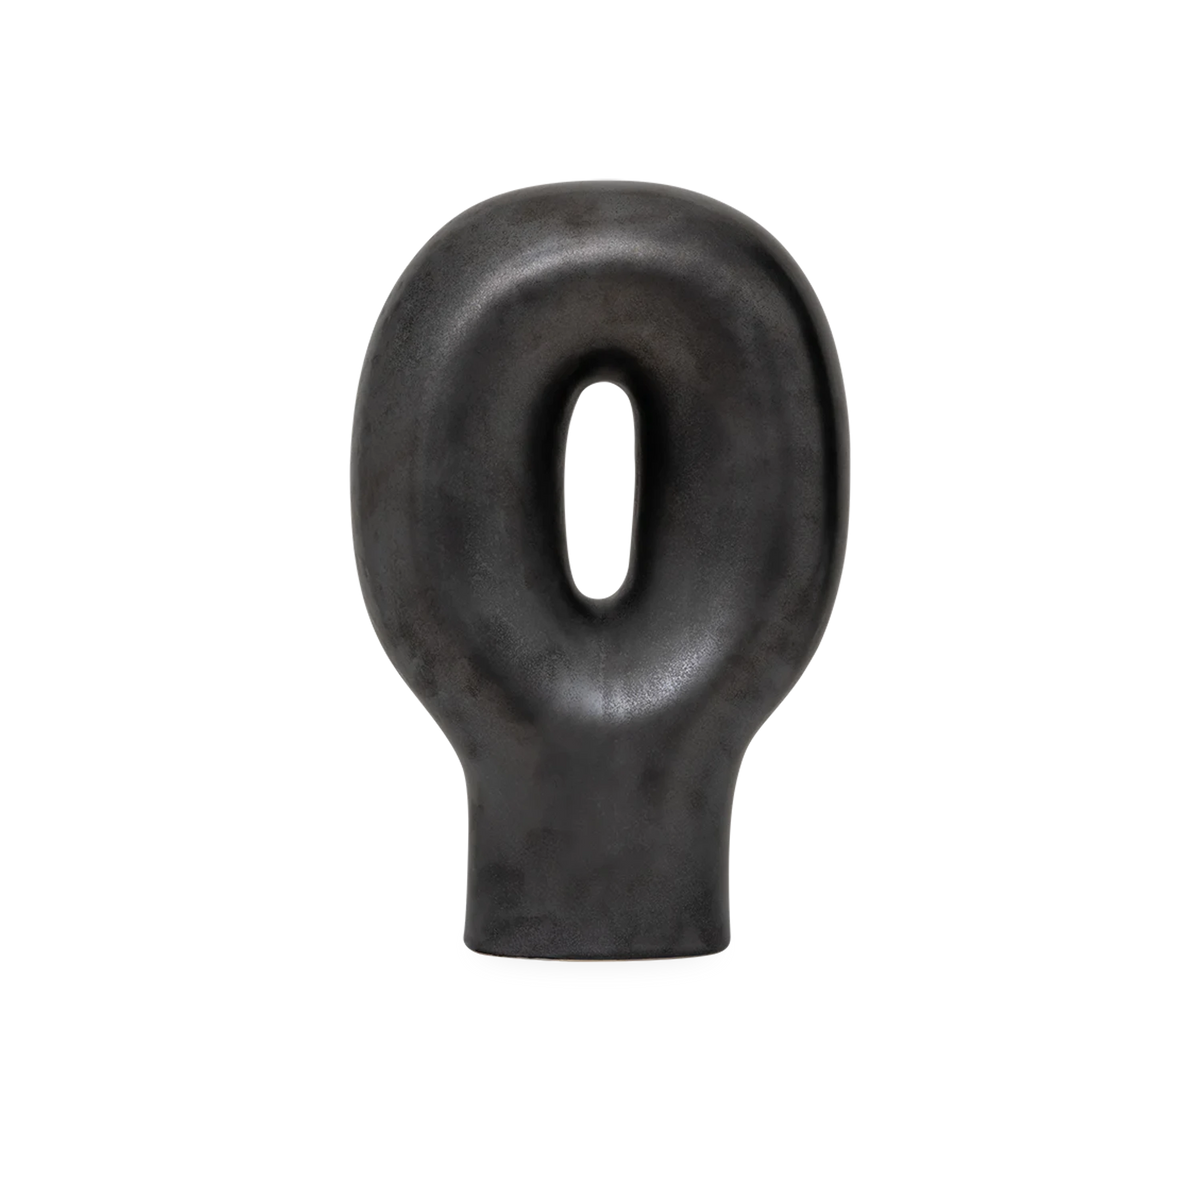 Its name inspired by its dramatic, ovular silhouette, the Ete Ceramic Sculpture features a distinct round body that is finished with a matte metallic glaze.